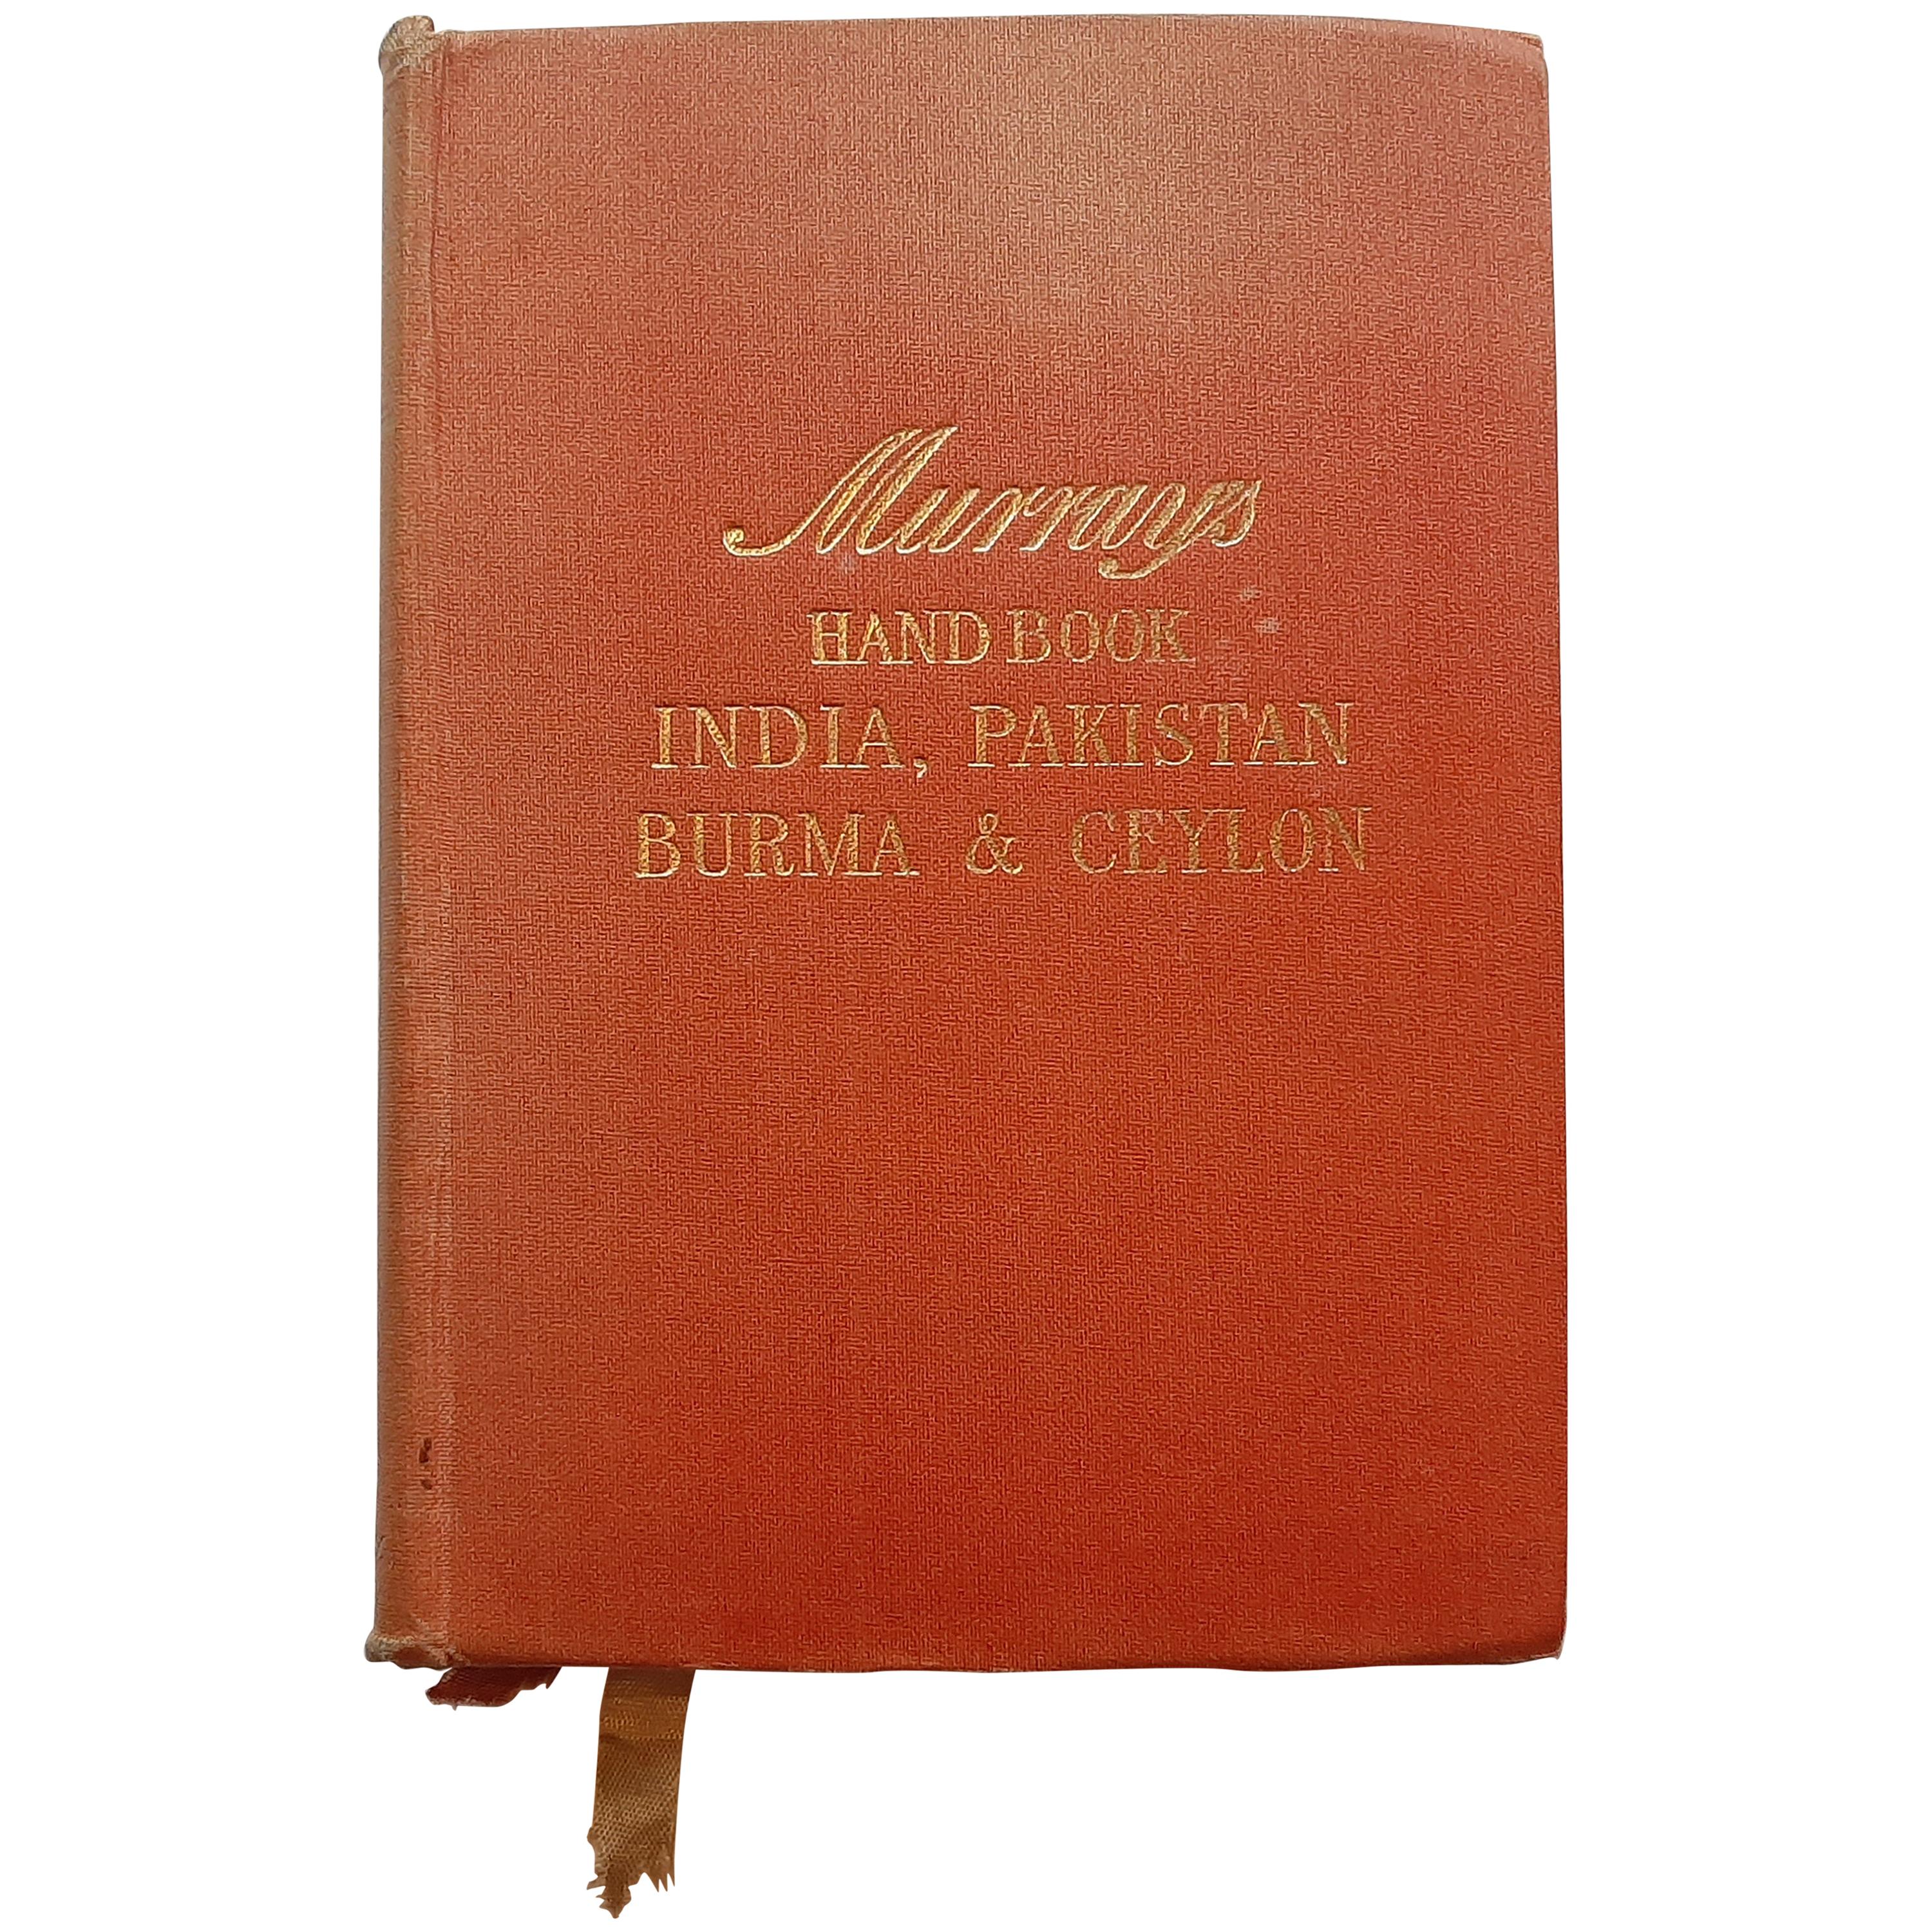 Handbook for Travellers in India, Pakistan, Burma and Ceylon by Lothian, 1955